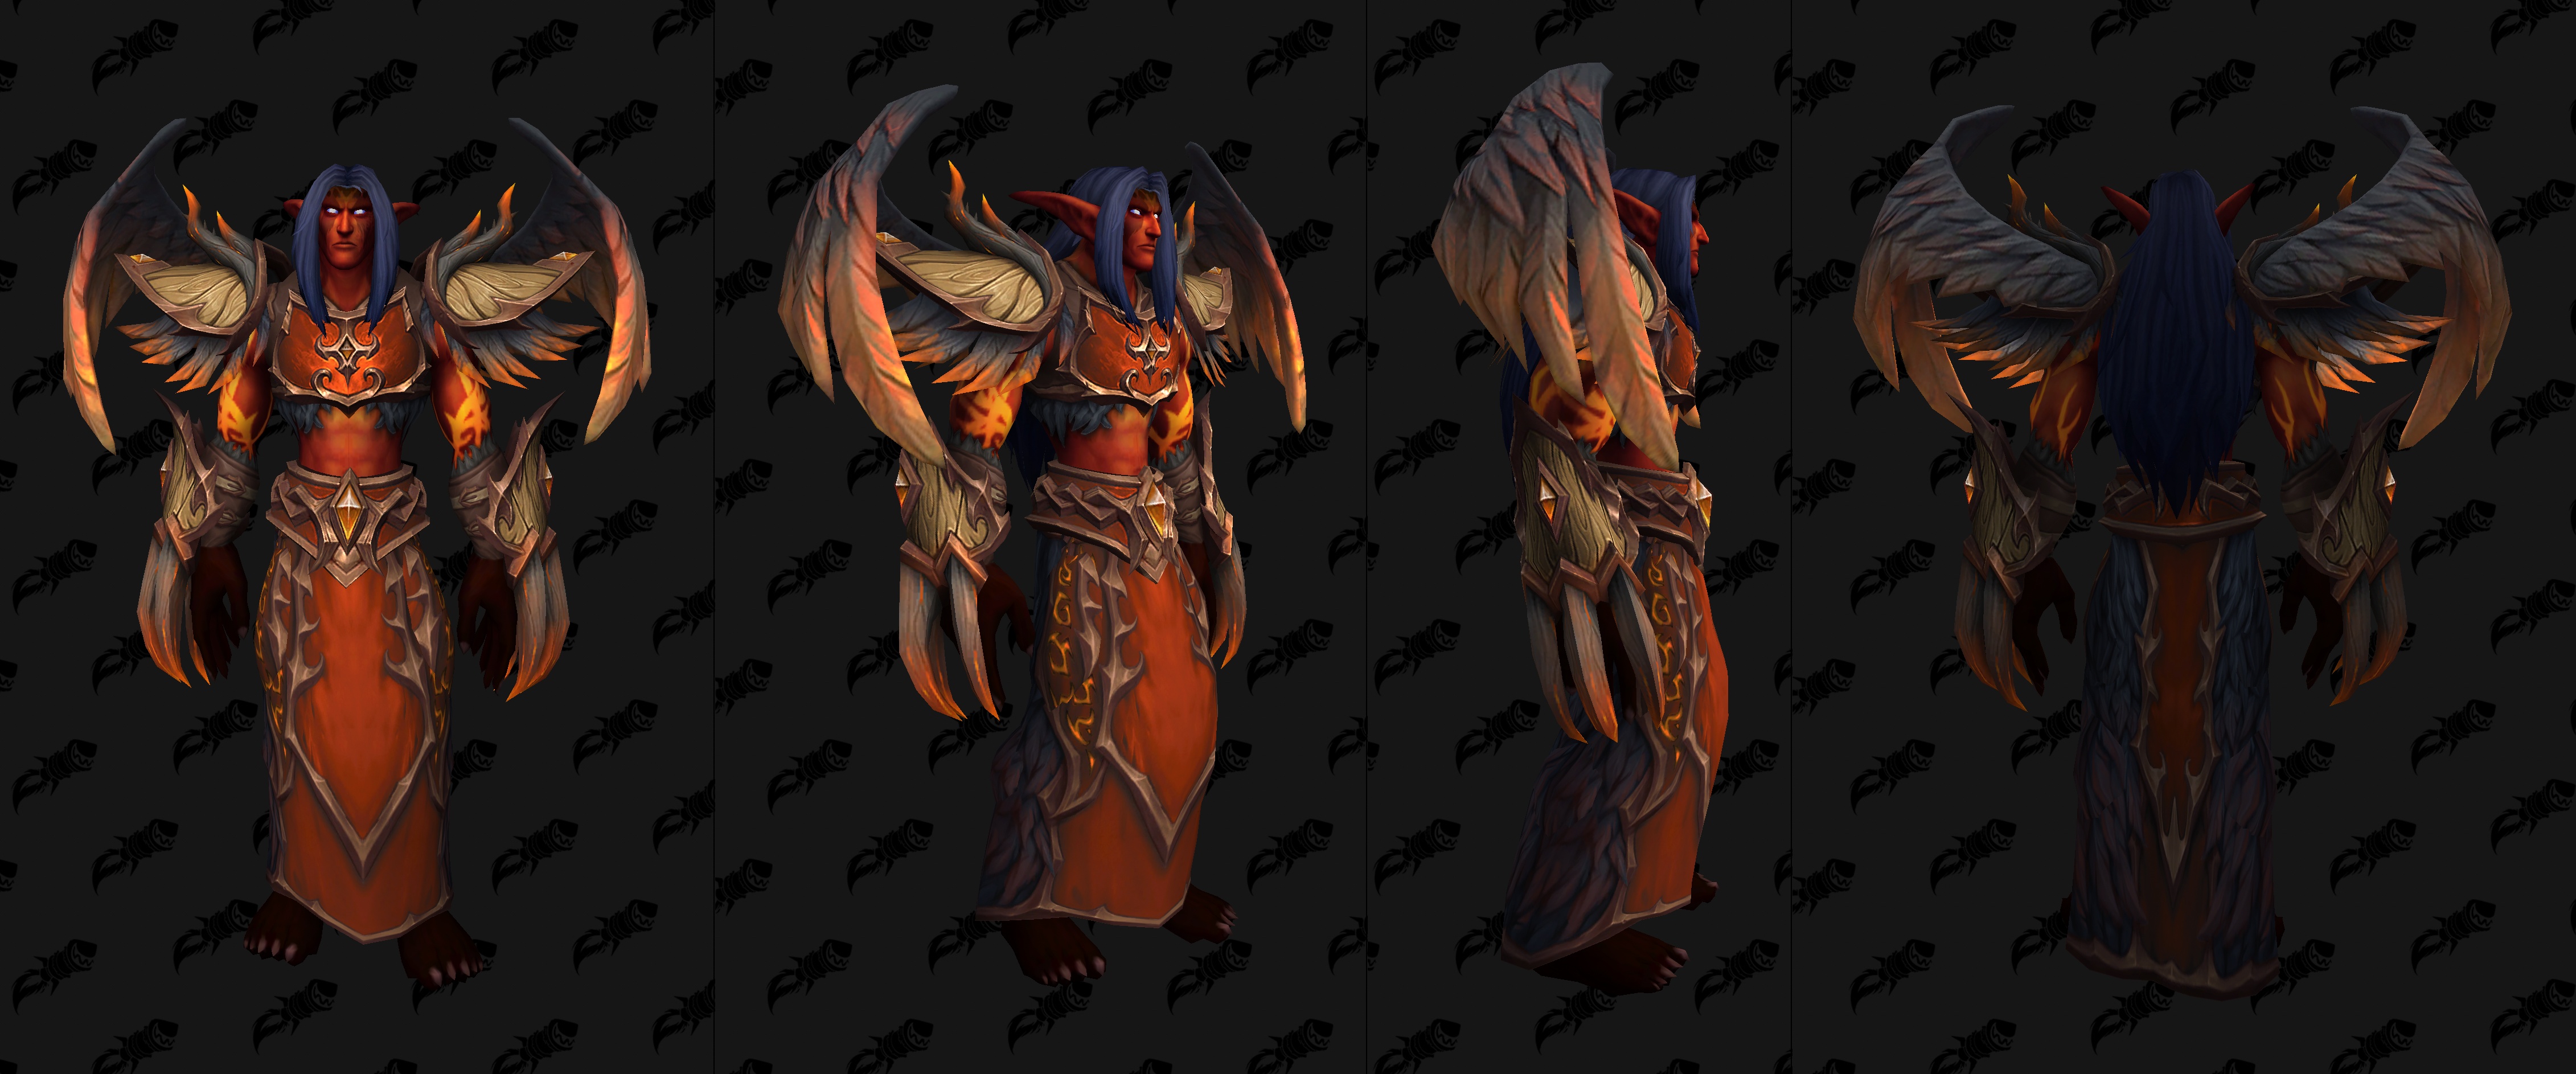 Druid of the Flame - Fury Incarnate PTR - World of Warcraft Forums